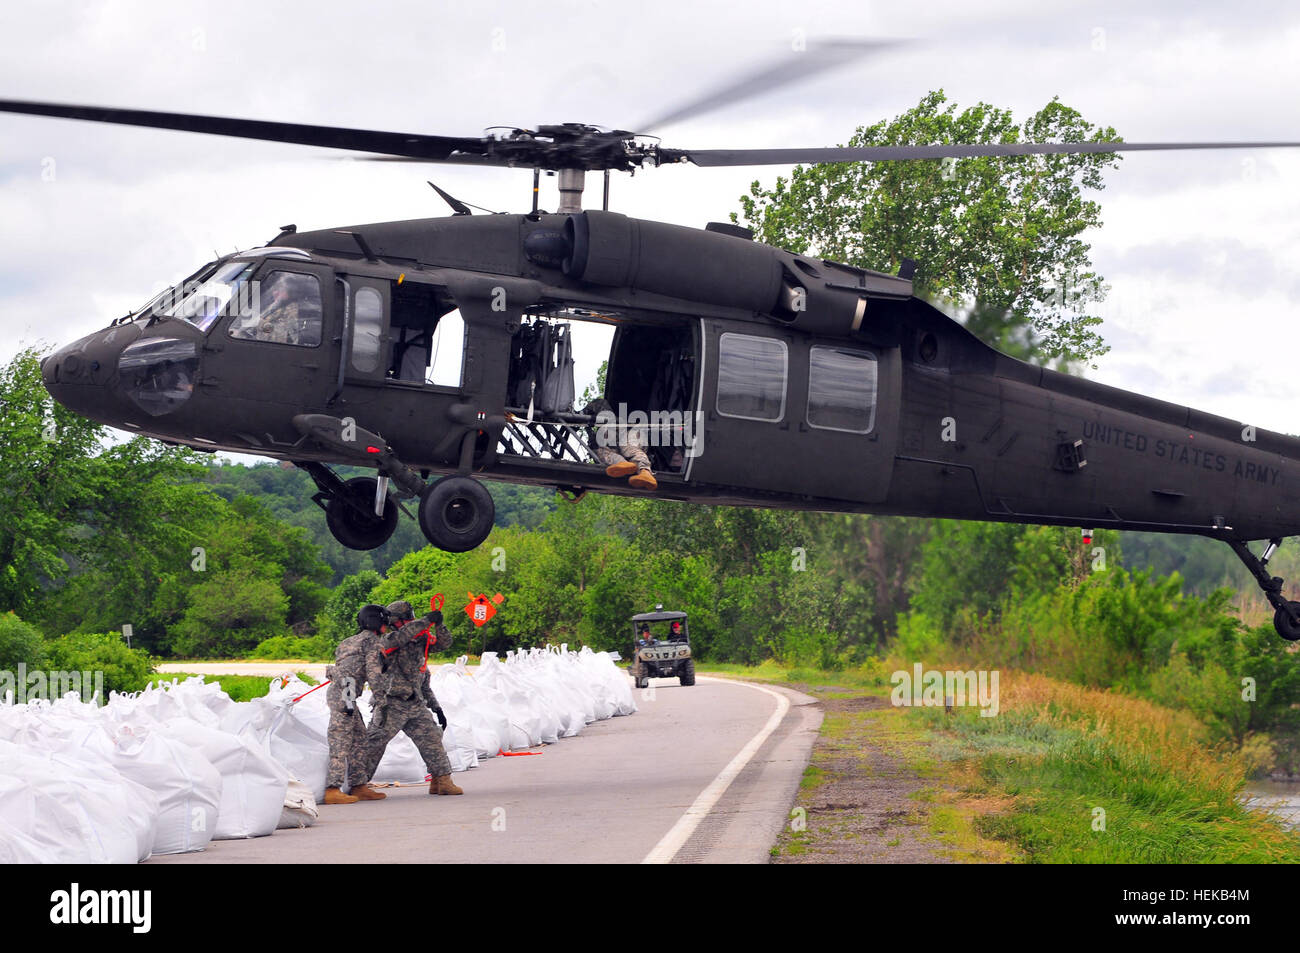 The Missouri National Guard asssited Atchison County authorities with personnel and a UH-60 Blackhawk Helicopter to repair levee L550 near Phelps City as the fight against the flood continues.  The Blackhawk was used to move over 145 Sandbags weighing two thousand pounds each onto areas of the levee damaged by overtopping in recent days.  The levee is being repaired with the expectation that it will prevent a full breach which would cause more severe flooding and would close state highway 136 located nearby. In this photo, Sgt. Arron Keesler, crew chief, C Co, 1/106th Avn Rgmt and Spc. Shane A Stock Photo